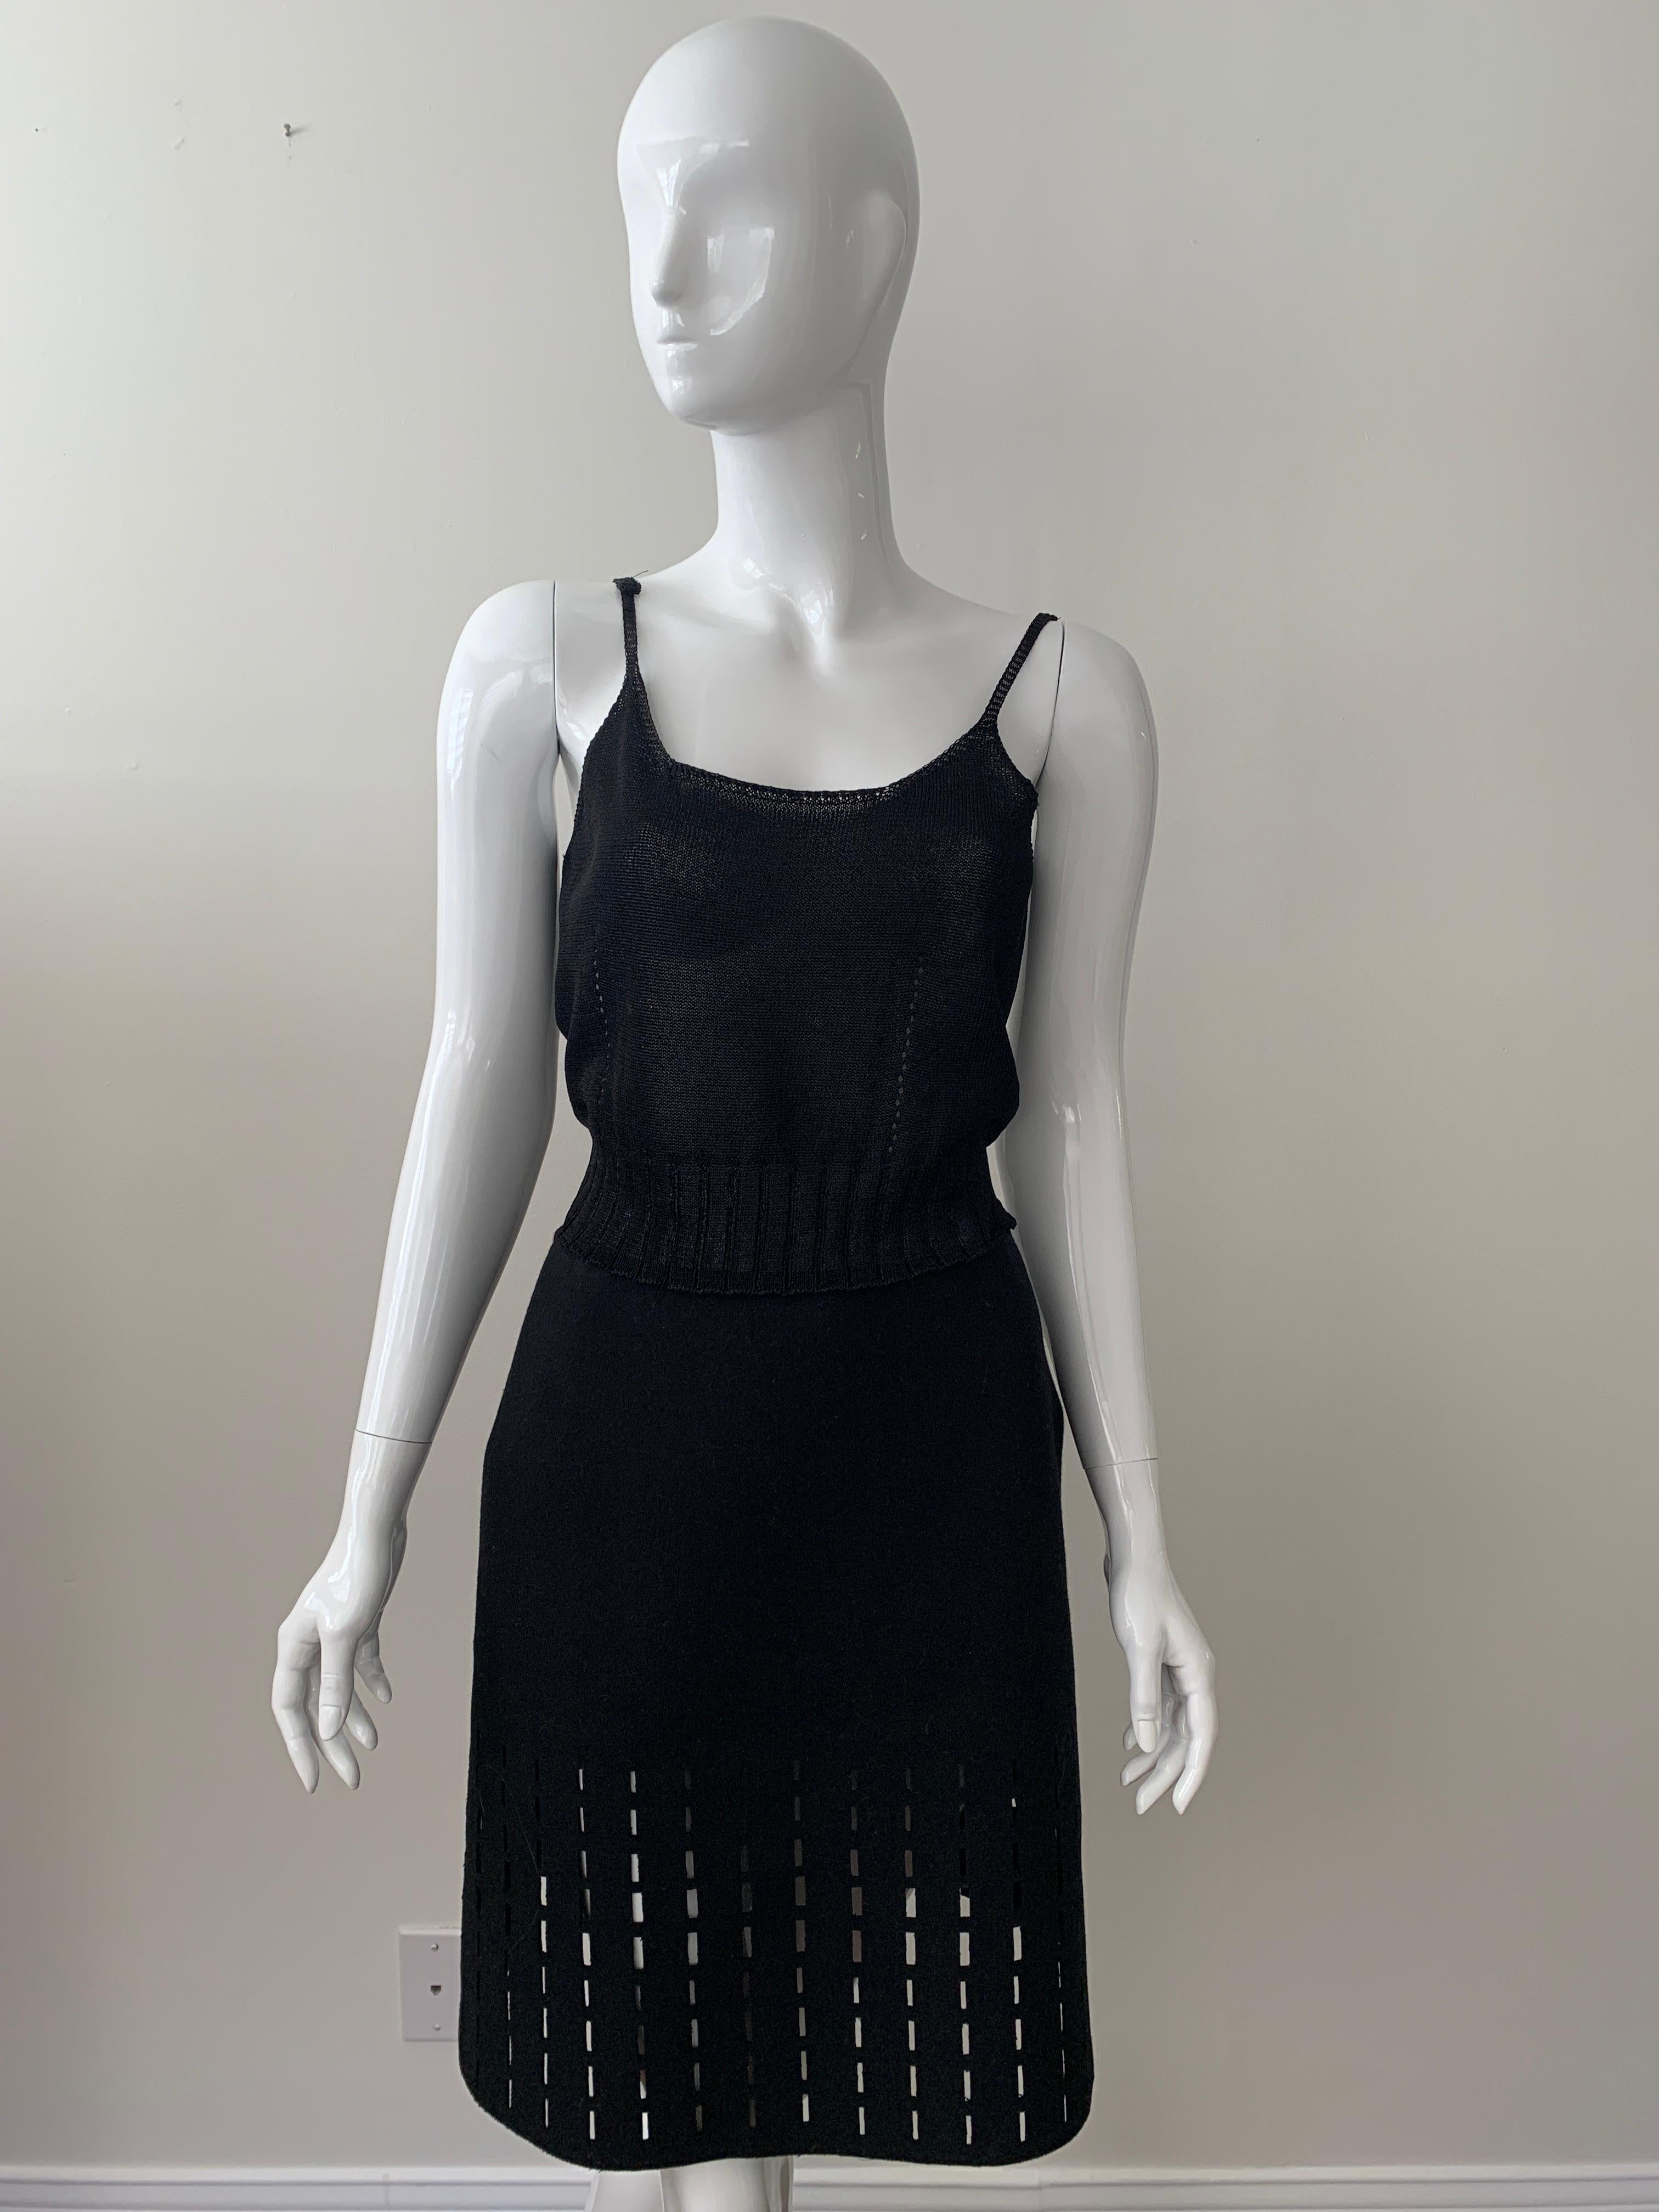 ALAIA Black Knee Length Skirt 
Size 42 (fits smaller) 
Perfect ALAIA skirt makes a classic edition to your wardrobe. 
Great condition. 

Approx. Est. Retail $ 2000